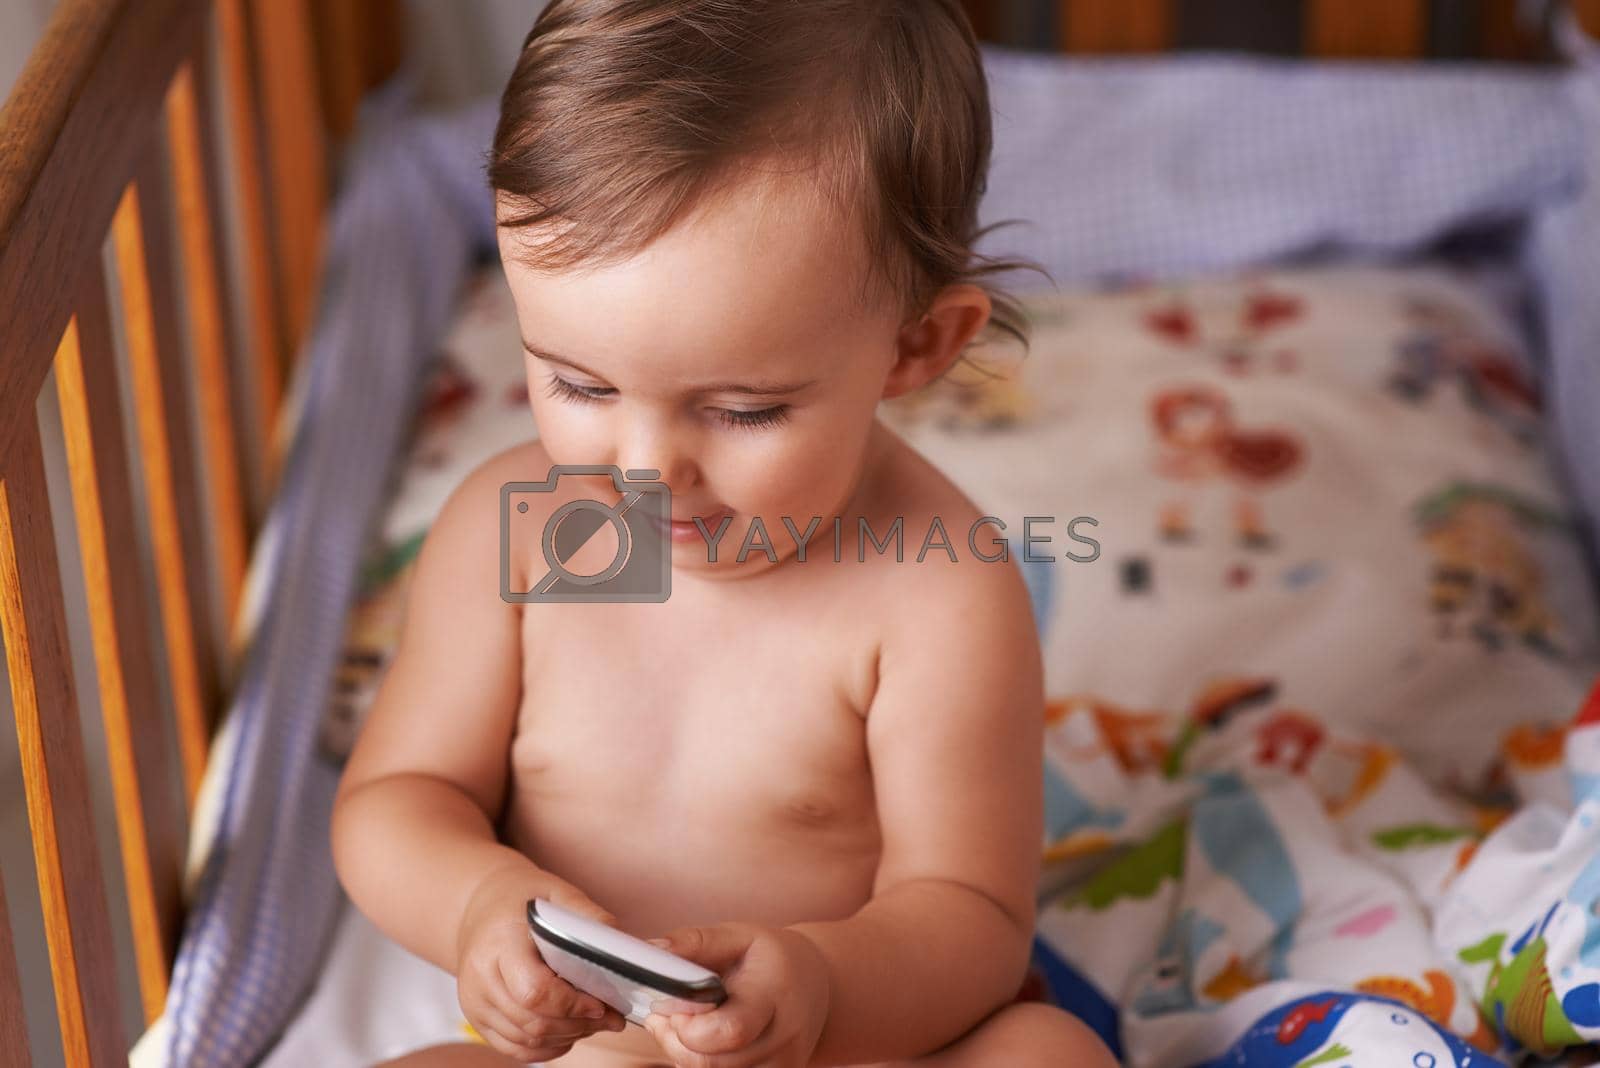 A little girl sitting in her crib playing with her cellphone.